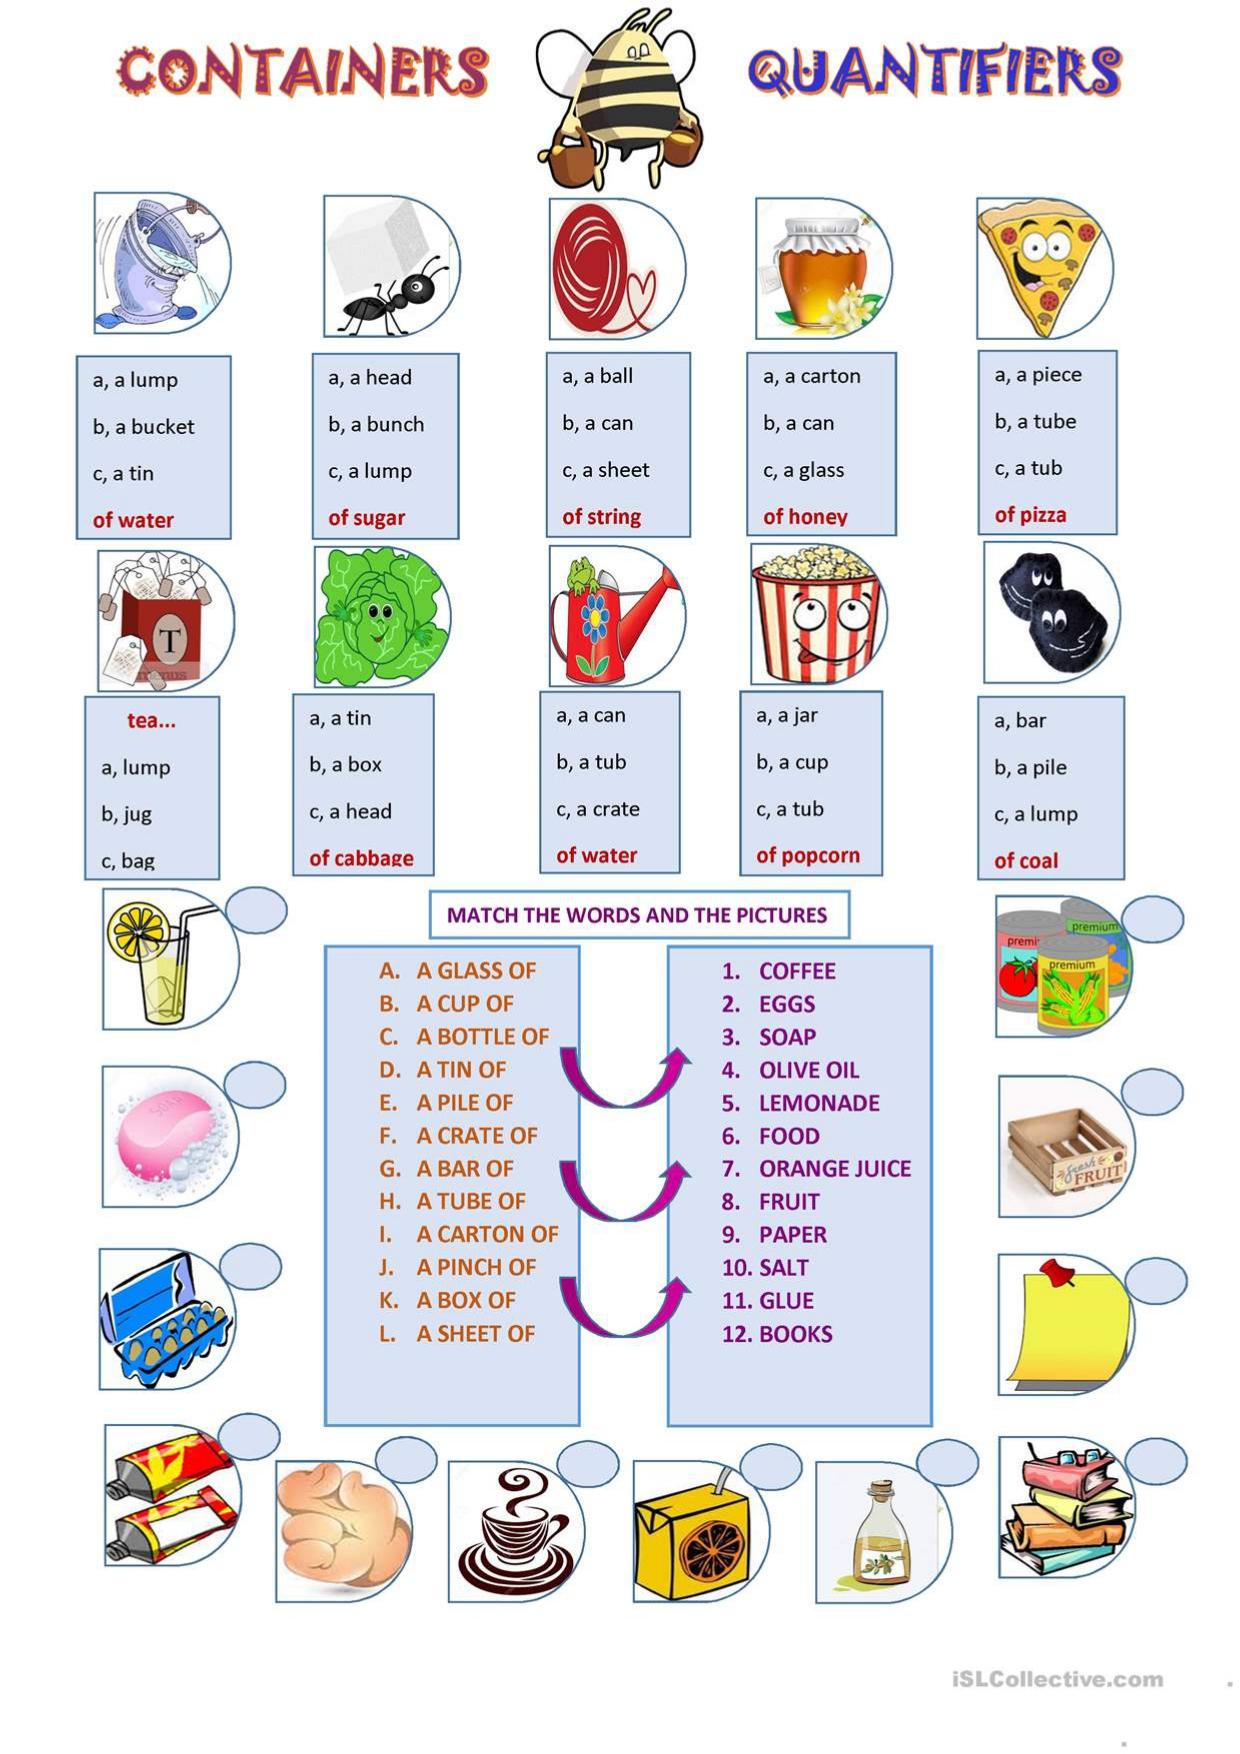 Grammar corner Containers and Quantifiers